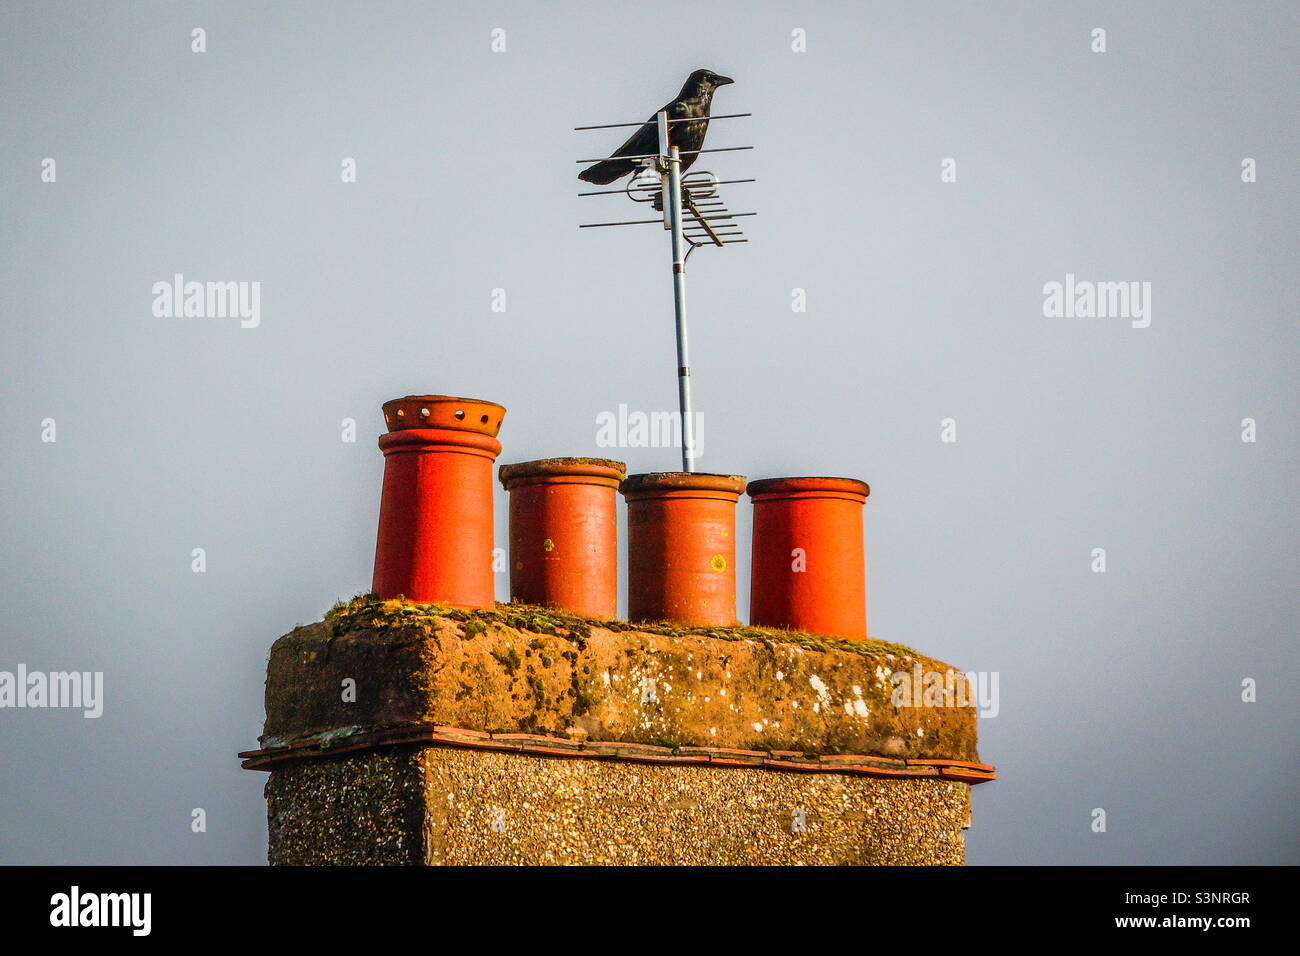 Getting the perfect aerial view - A black crow sitting on a television aerial mounted on a chimney stack on a residential property in Glasgow, Scotland Stock Photo